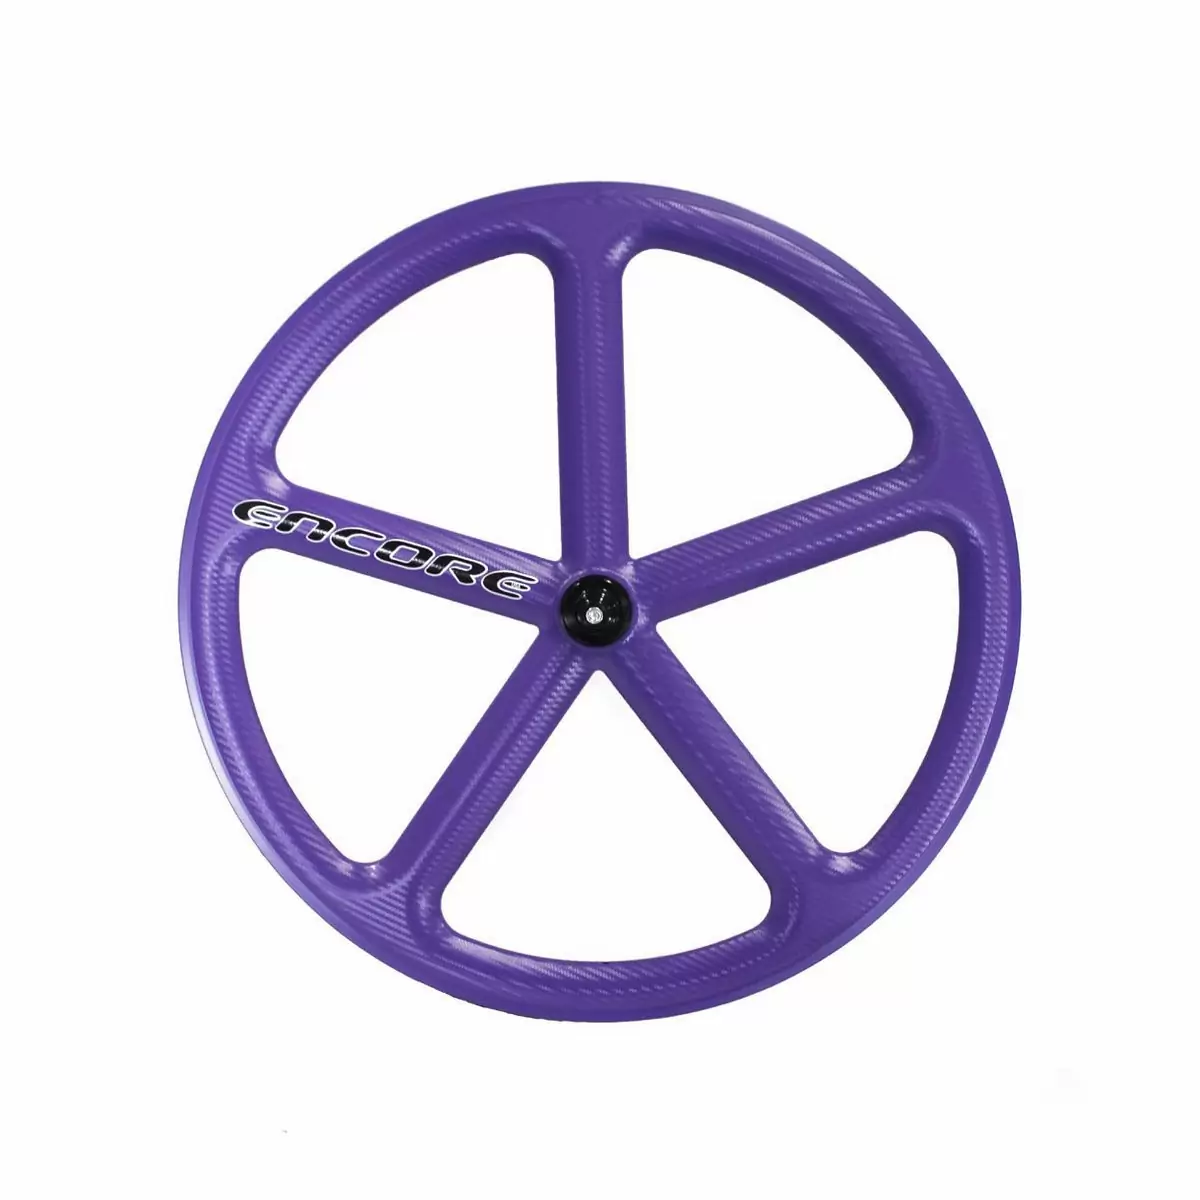 roue avant 700c track 5 rayons carbone tissage violet nmsw - image